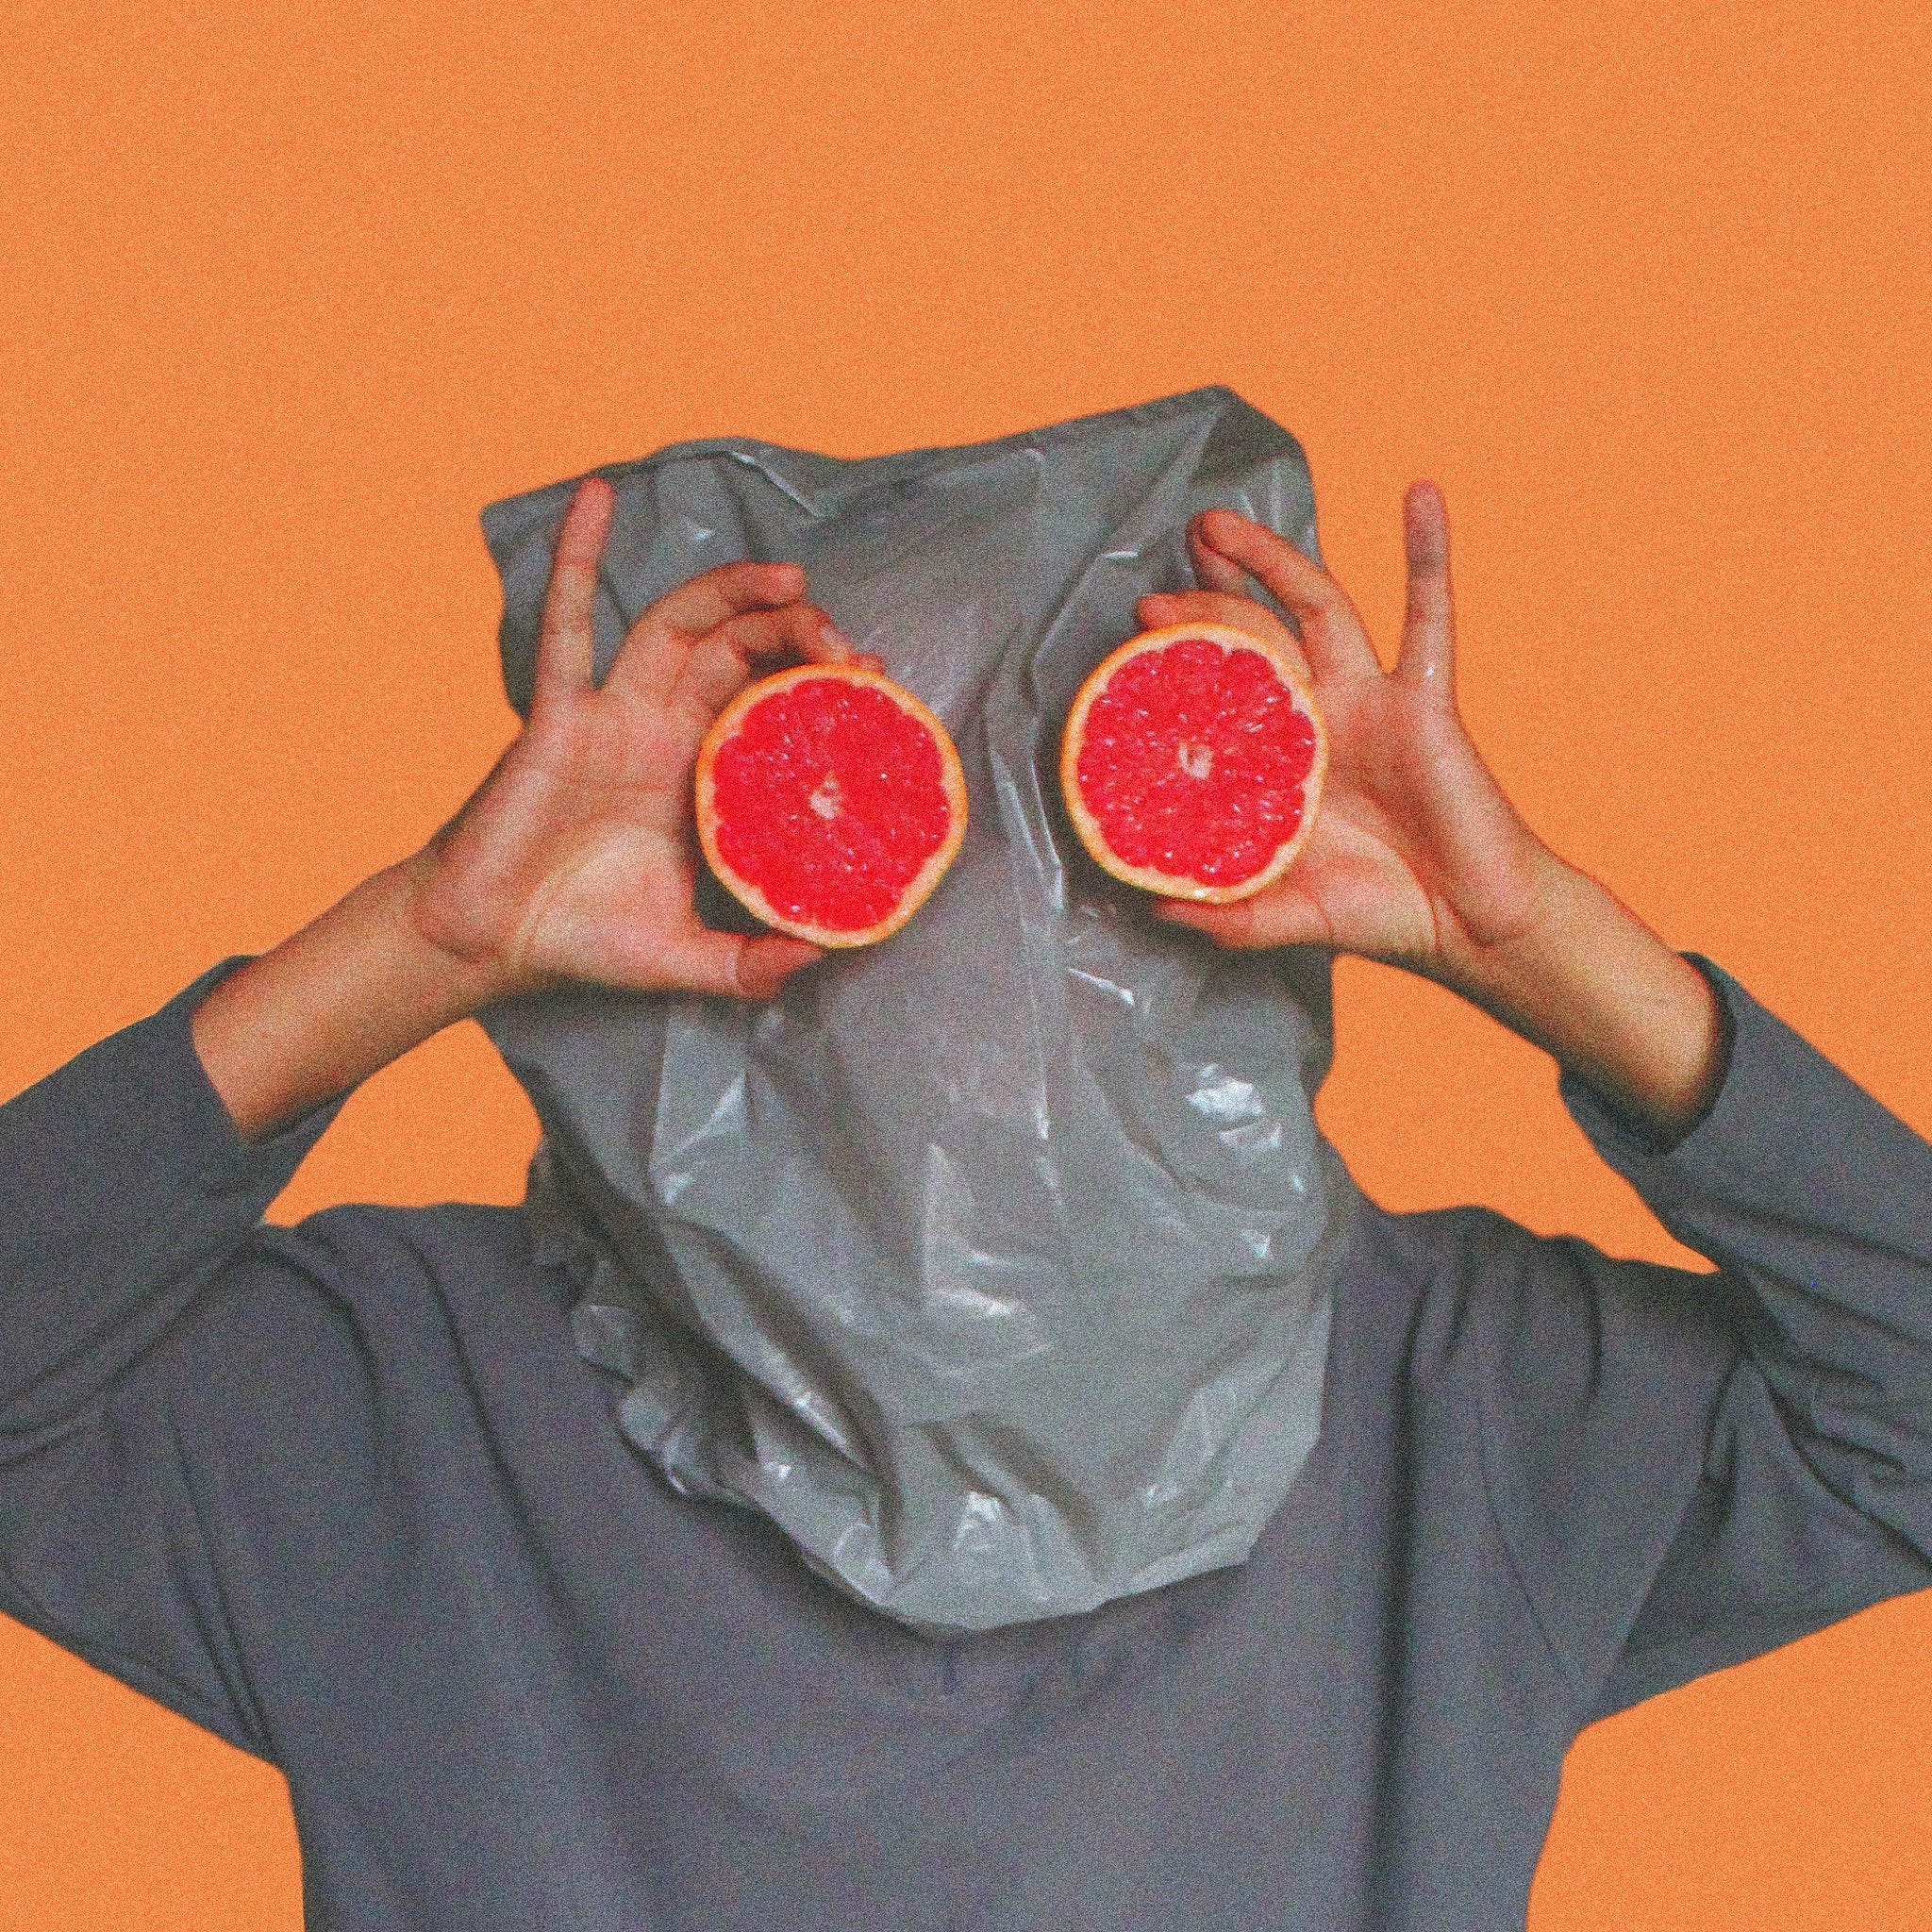 Person with bag on their head looking through oranges